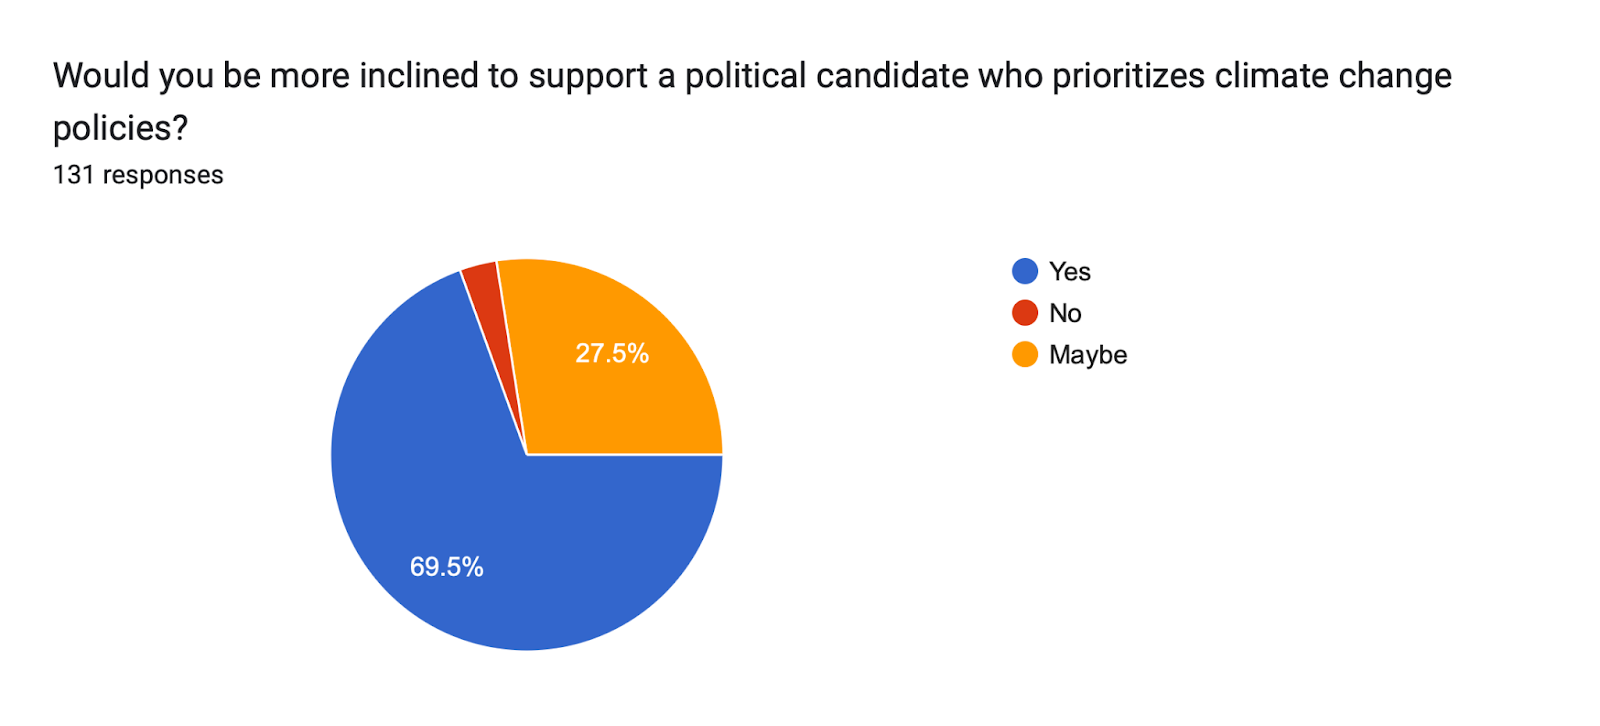 Forms response chart. Question title: Would you be more inclined to support a political candidate who prioritizes climate change policies?

. Number of responses: 131 responses.